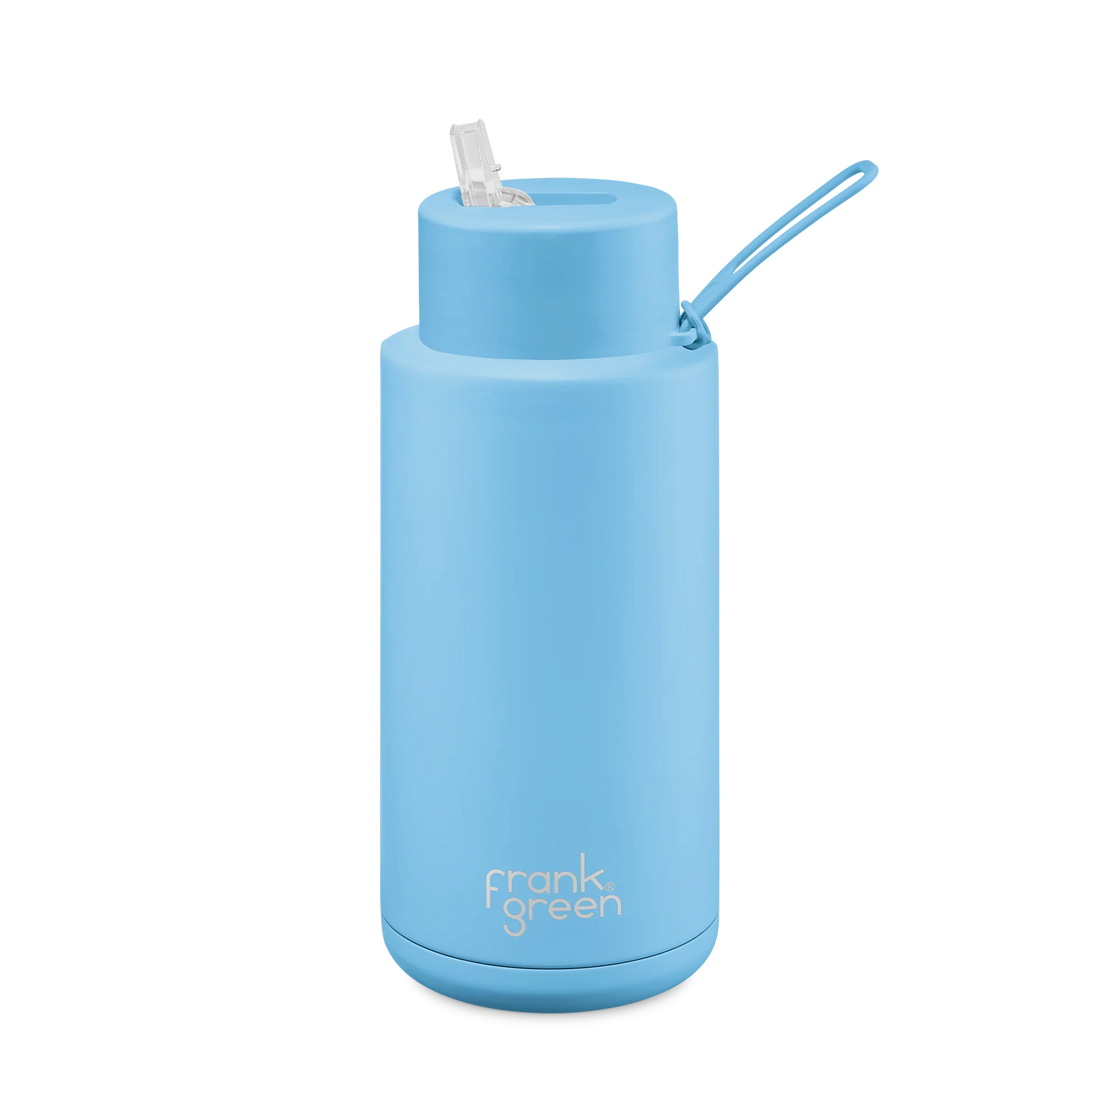 Frank Green Stainless Steel Ceramic Reusable Bottle Sky Blue With Straw And Strap 34oz/1,000ml